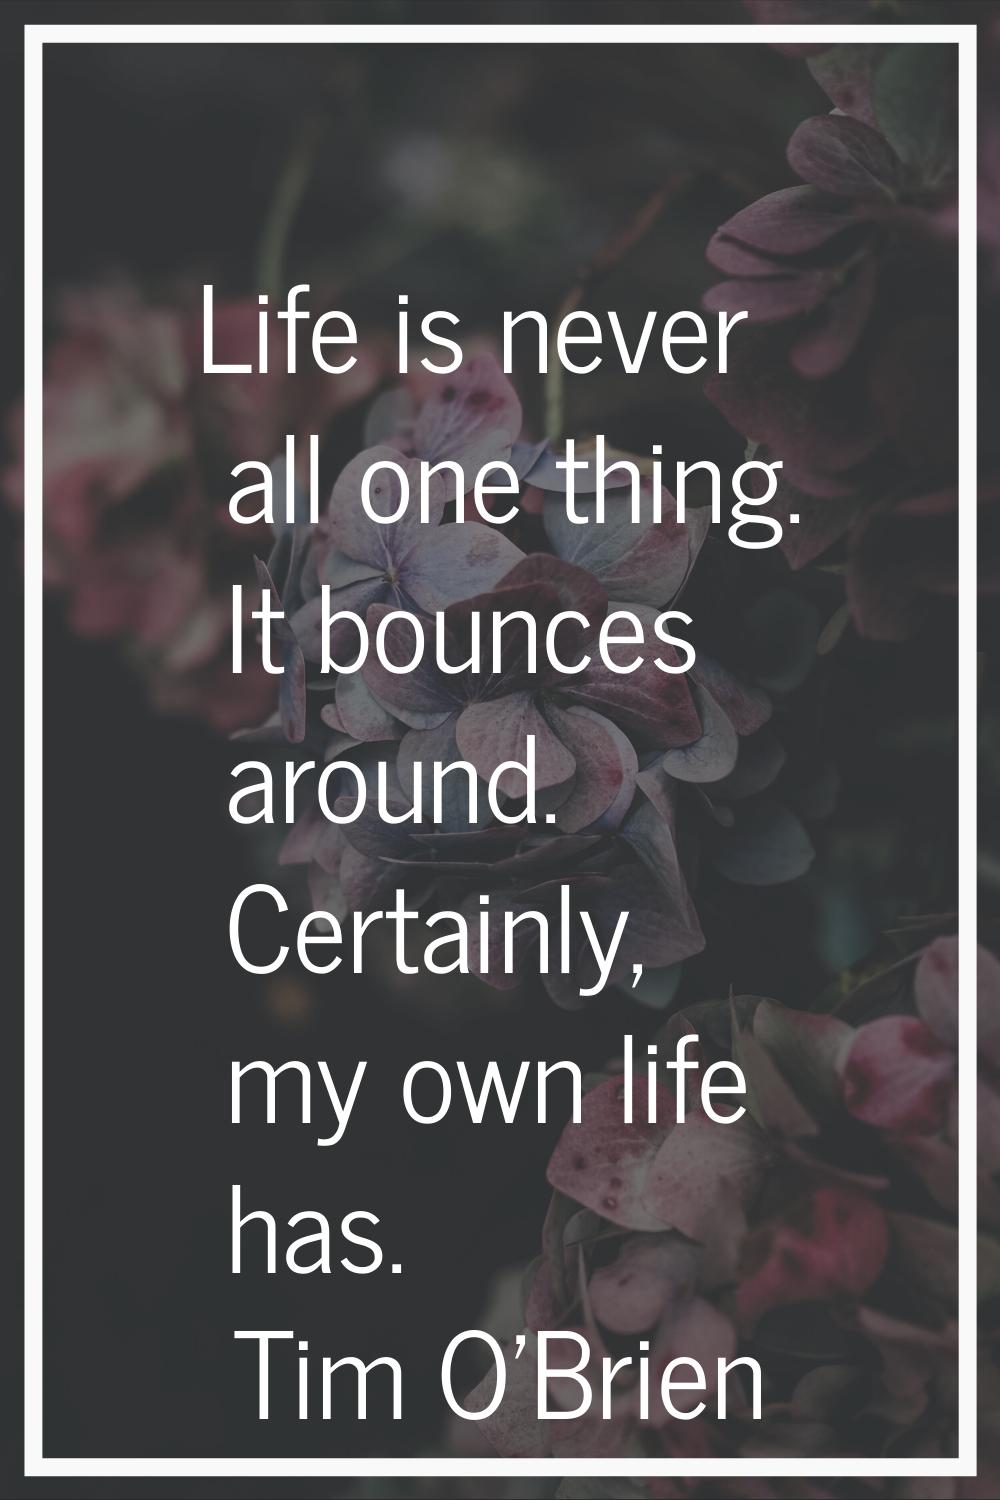 Life is never all one thing. It bounces around. Certainly, my own life has.